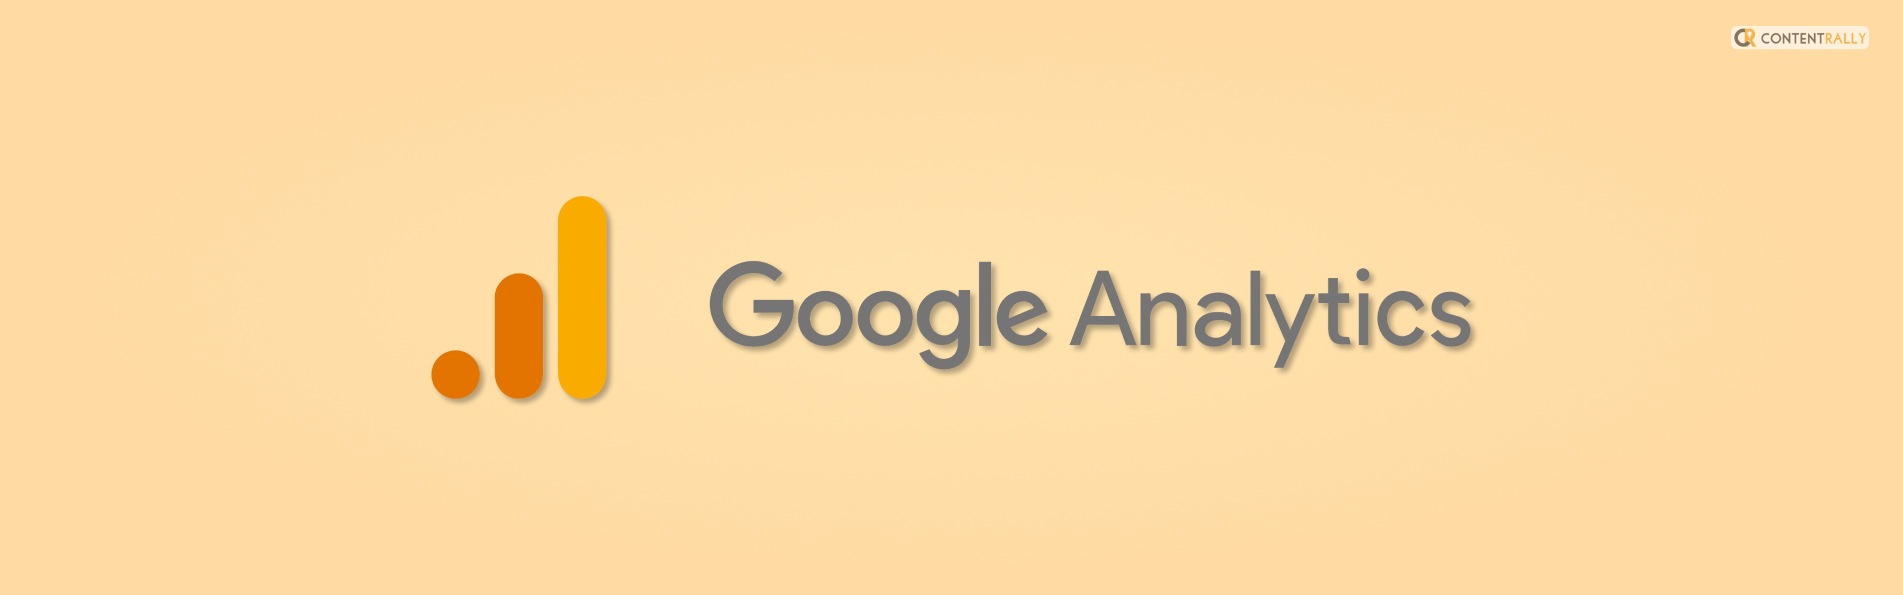 when does the analytics tracking code send a pageview hit to google analytics?